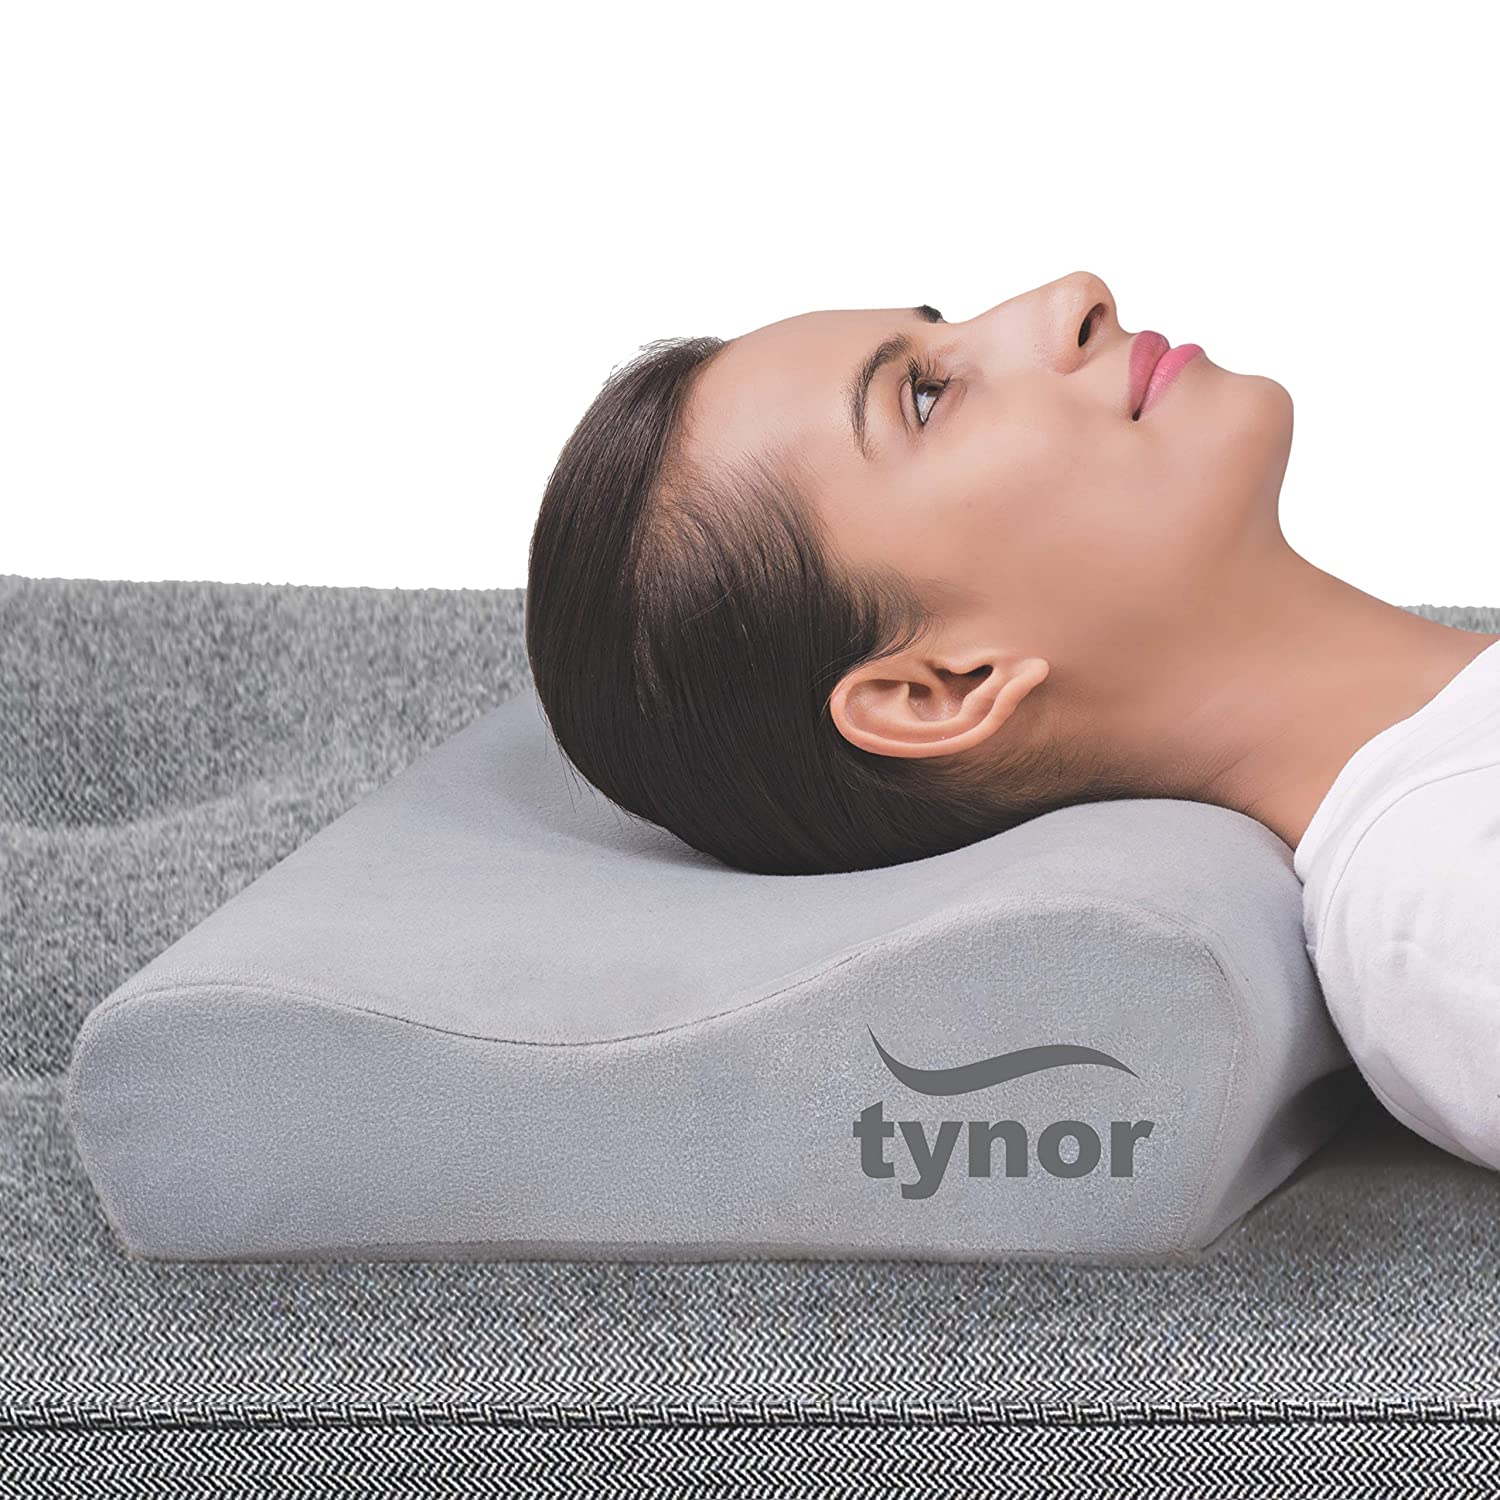 cervical pillow - best pillow for neck pain India | Business Insider India